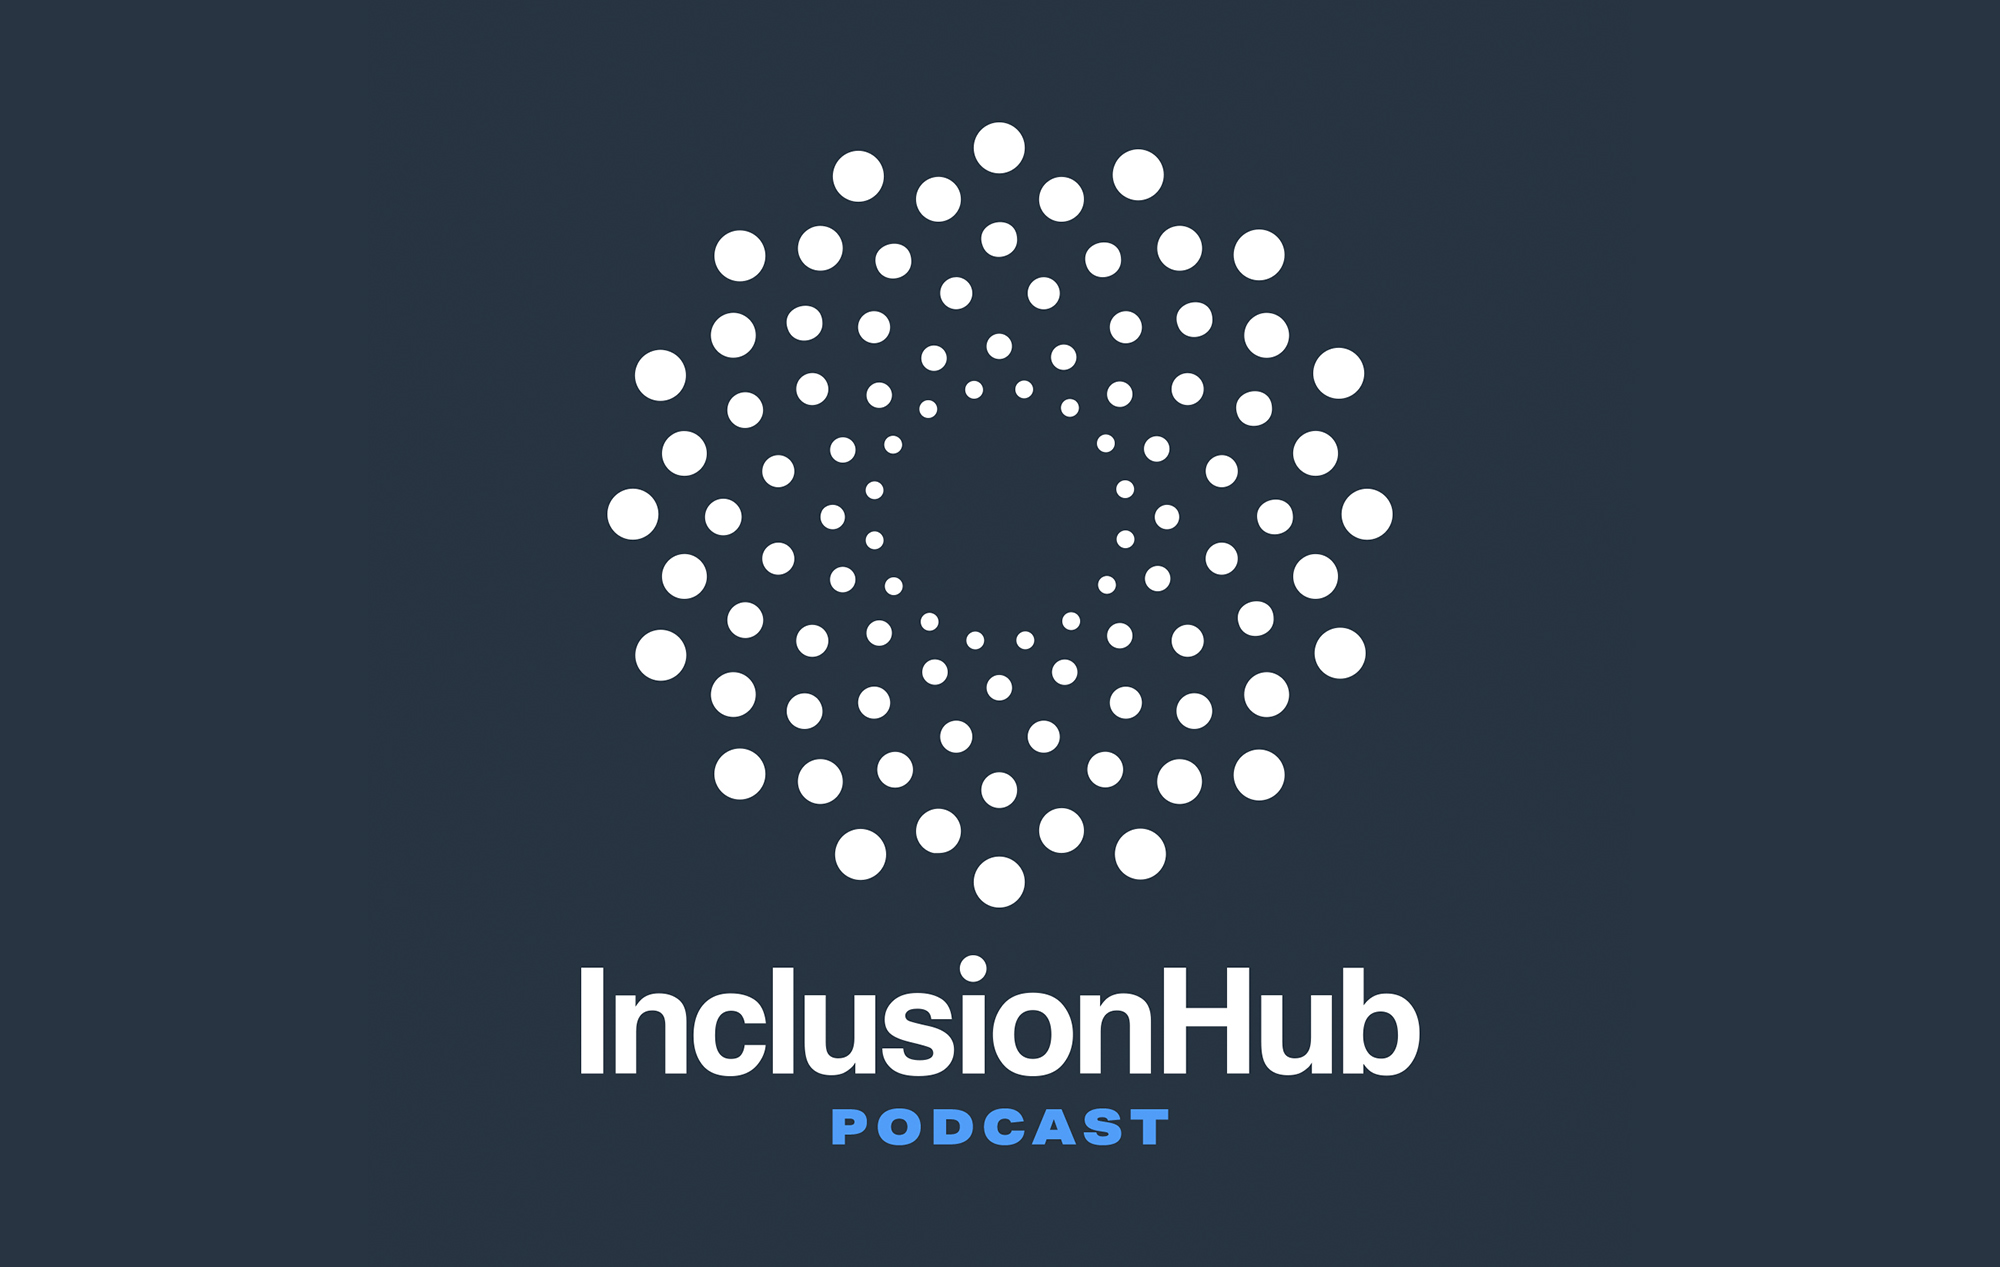 Episode 13: The InclusionHub Podcast Founding Partner Spotlight — Be My Eyes